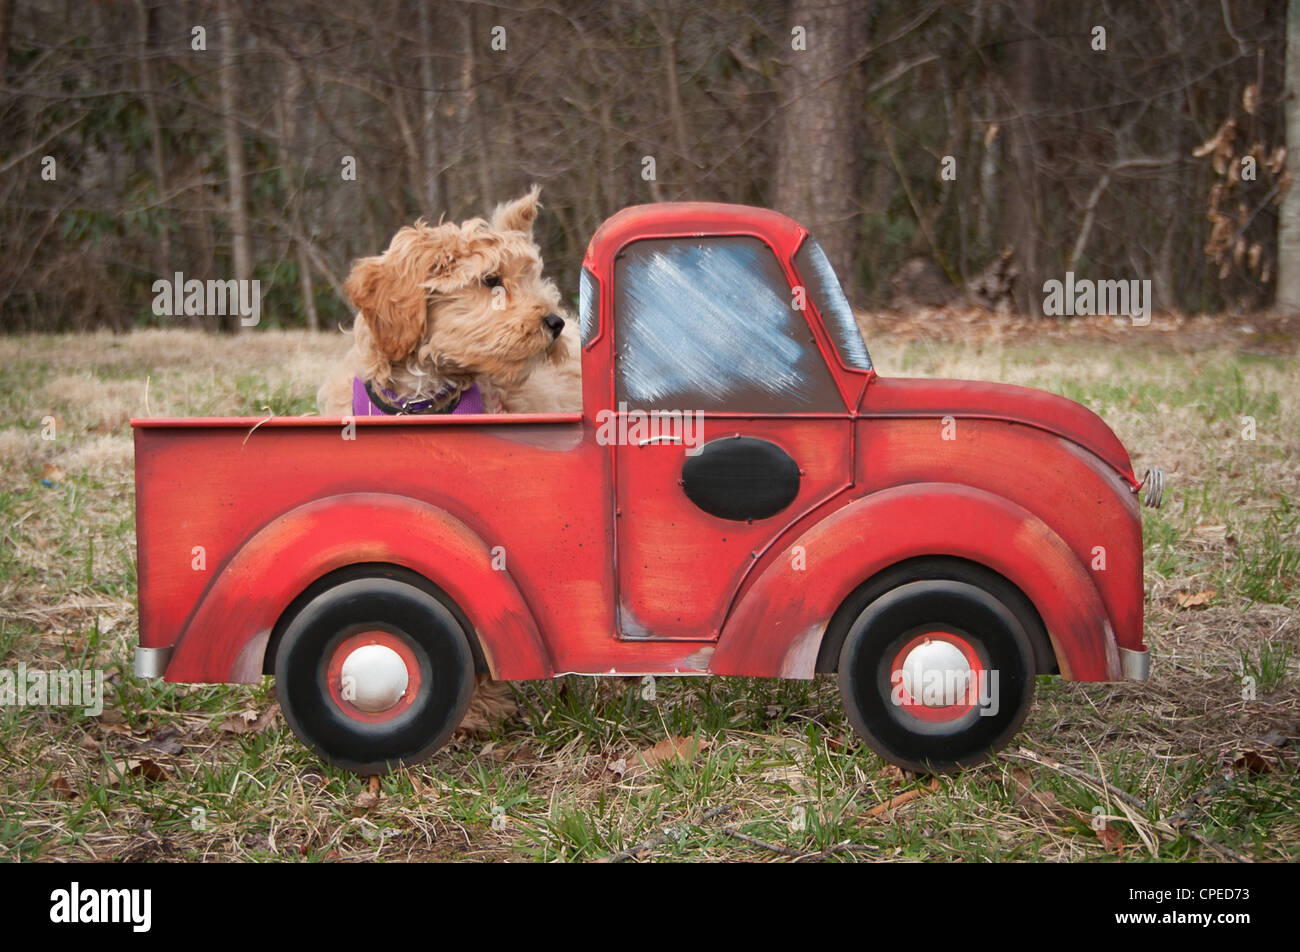 A Labradoodle sitting on the ground but it looks like it is riding in a toy truck Stock Photo